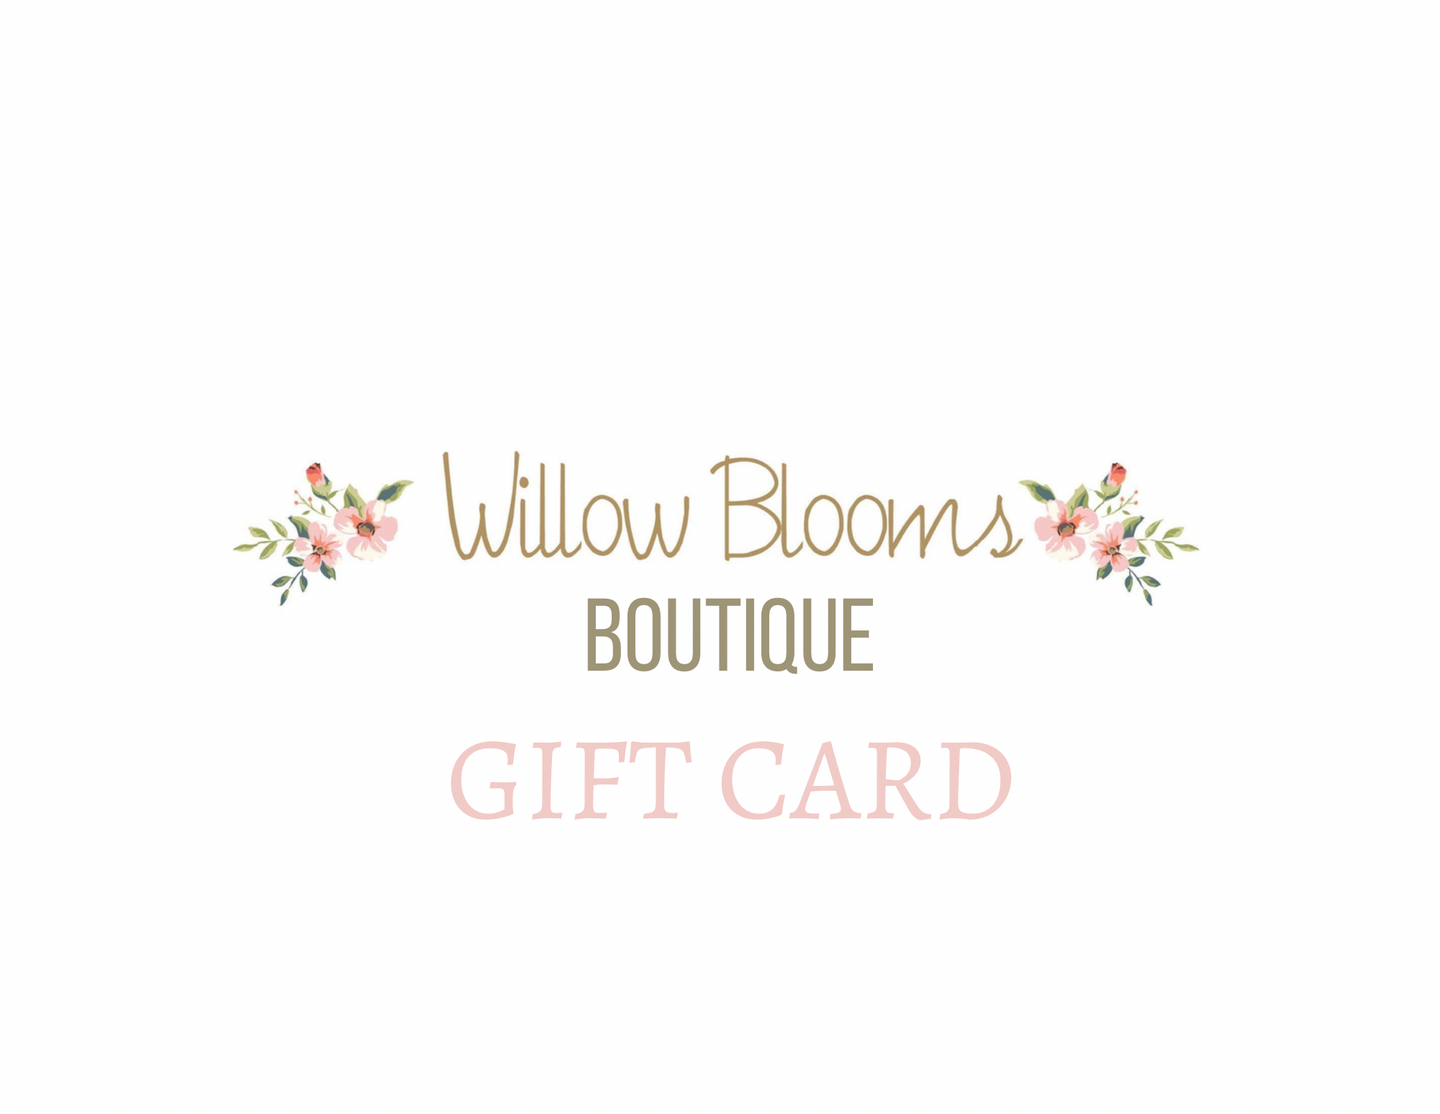 Willow Blooms Boutique E Gift Card